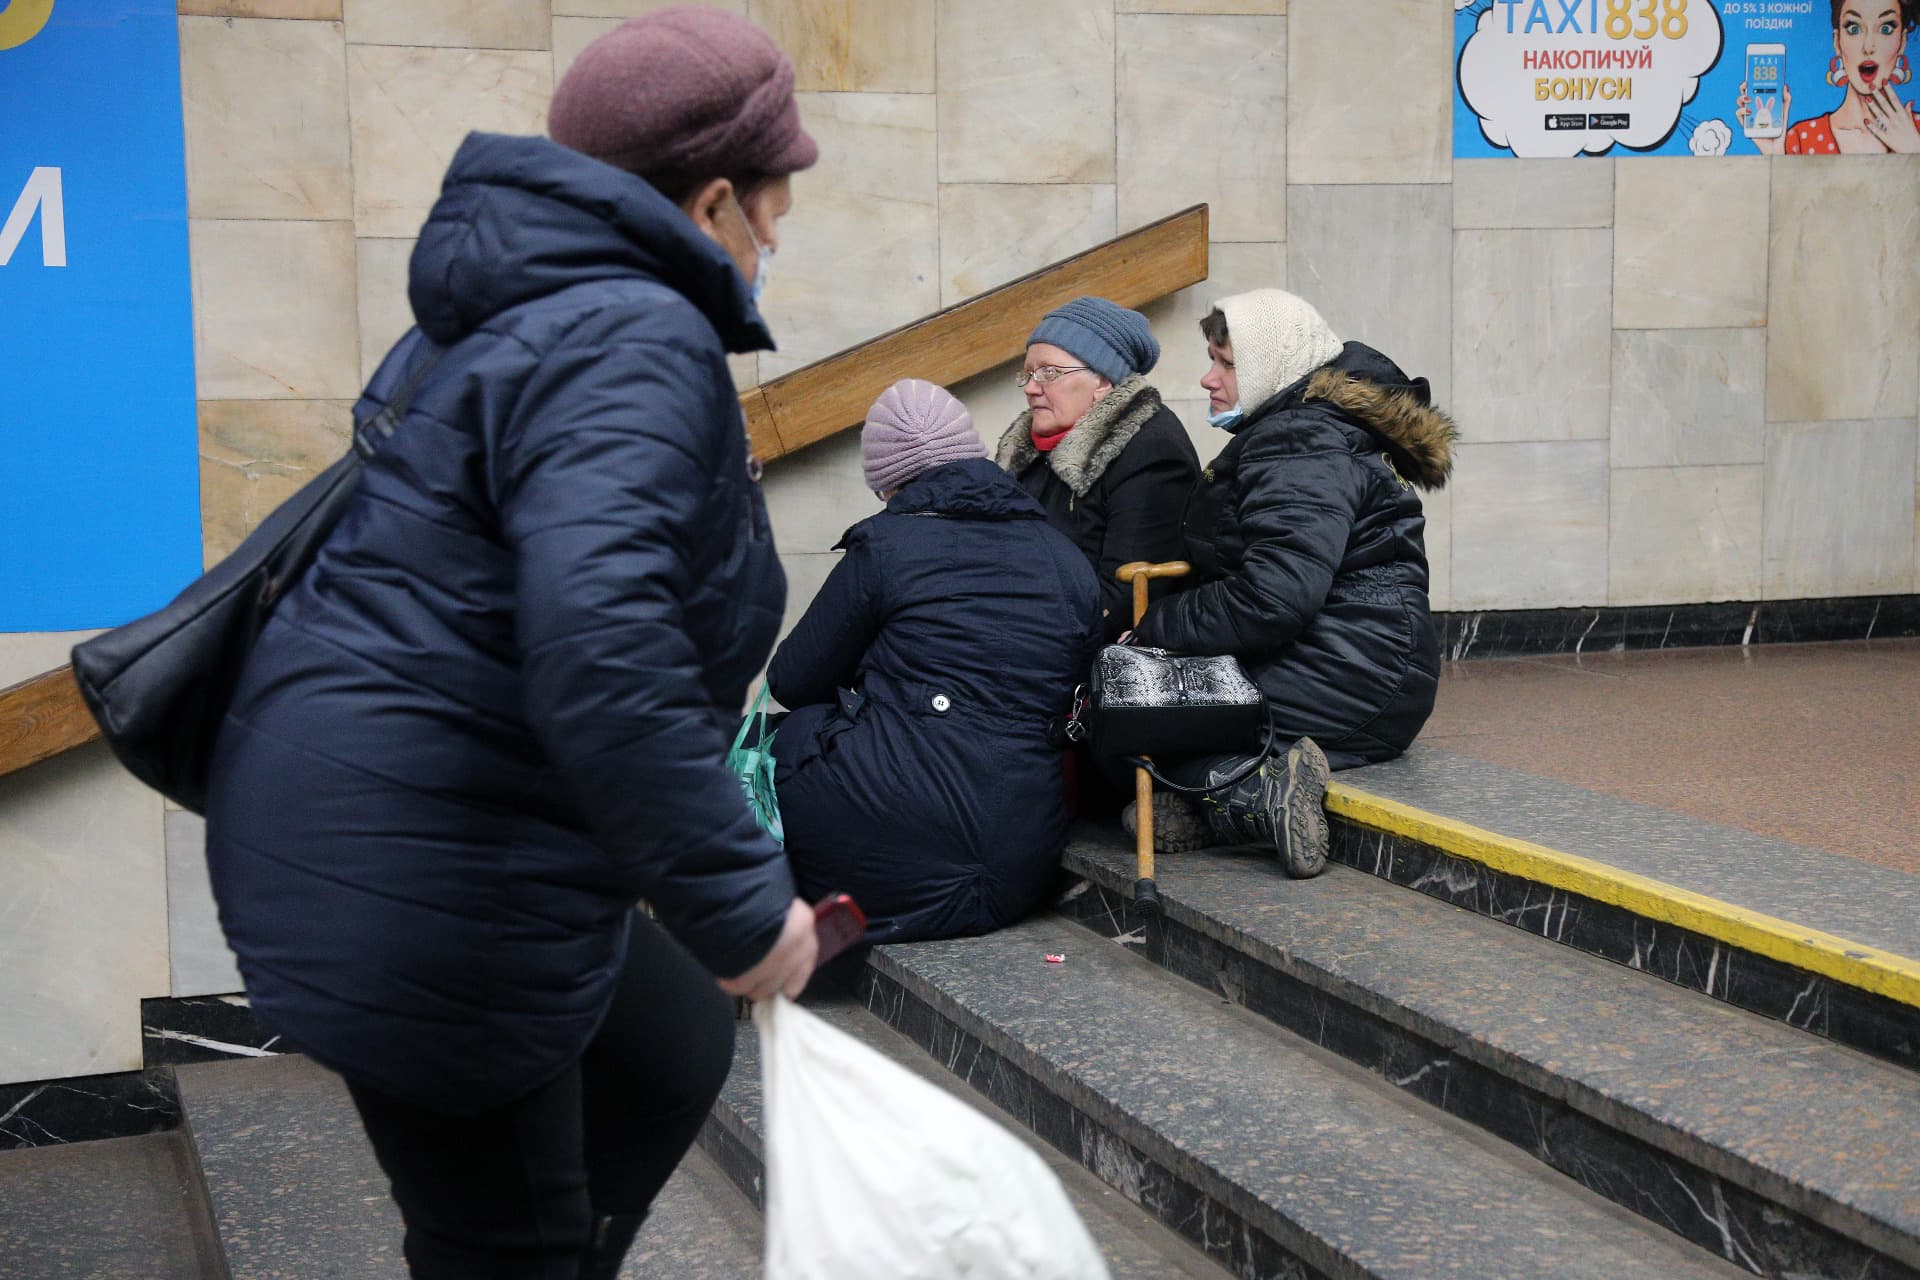 Women sit on the stairs at the subway entrance